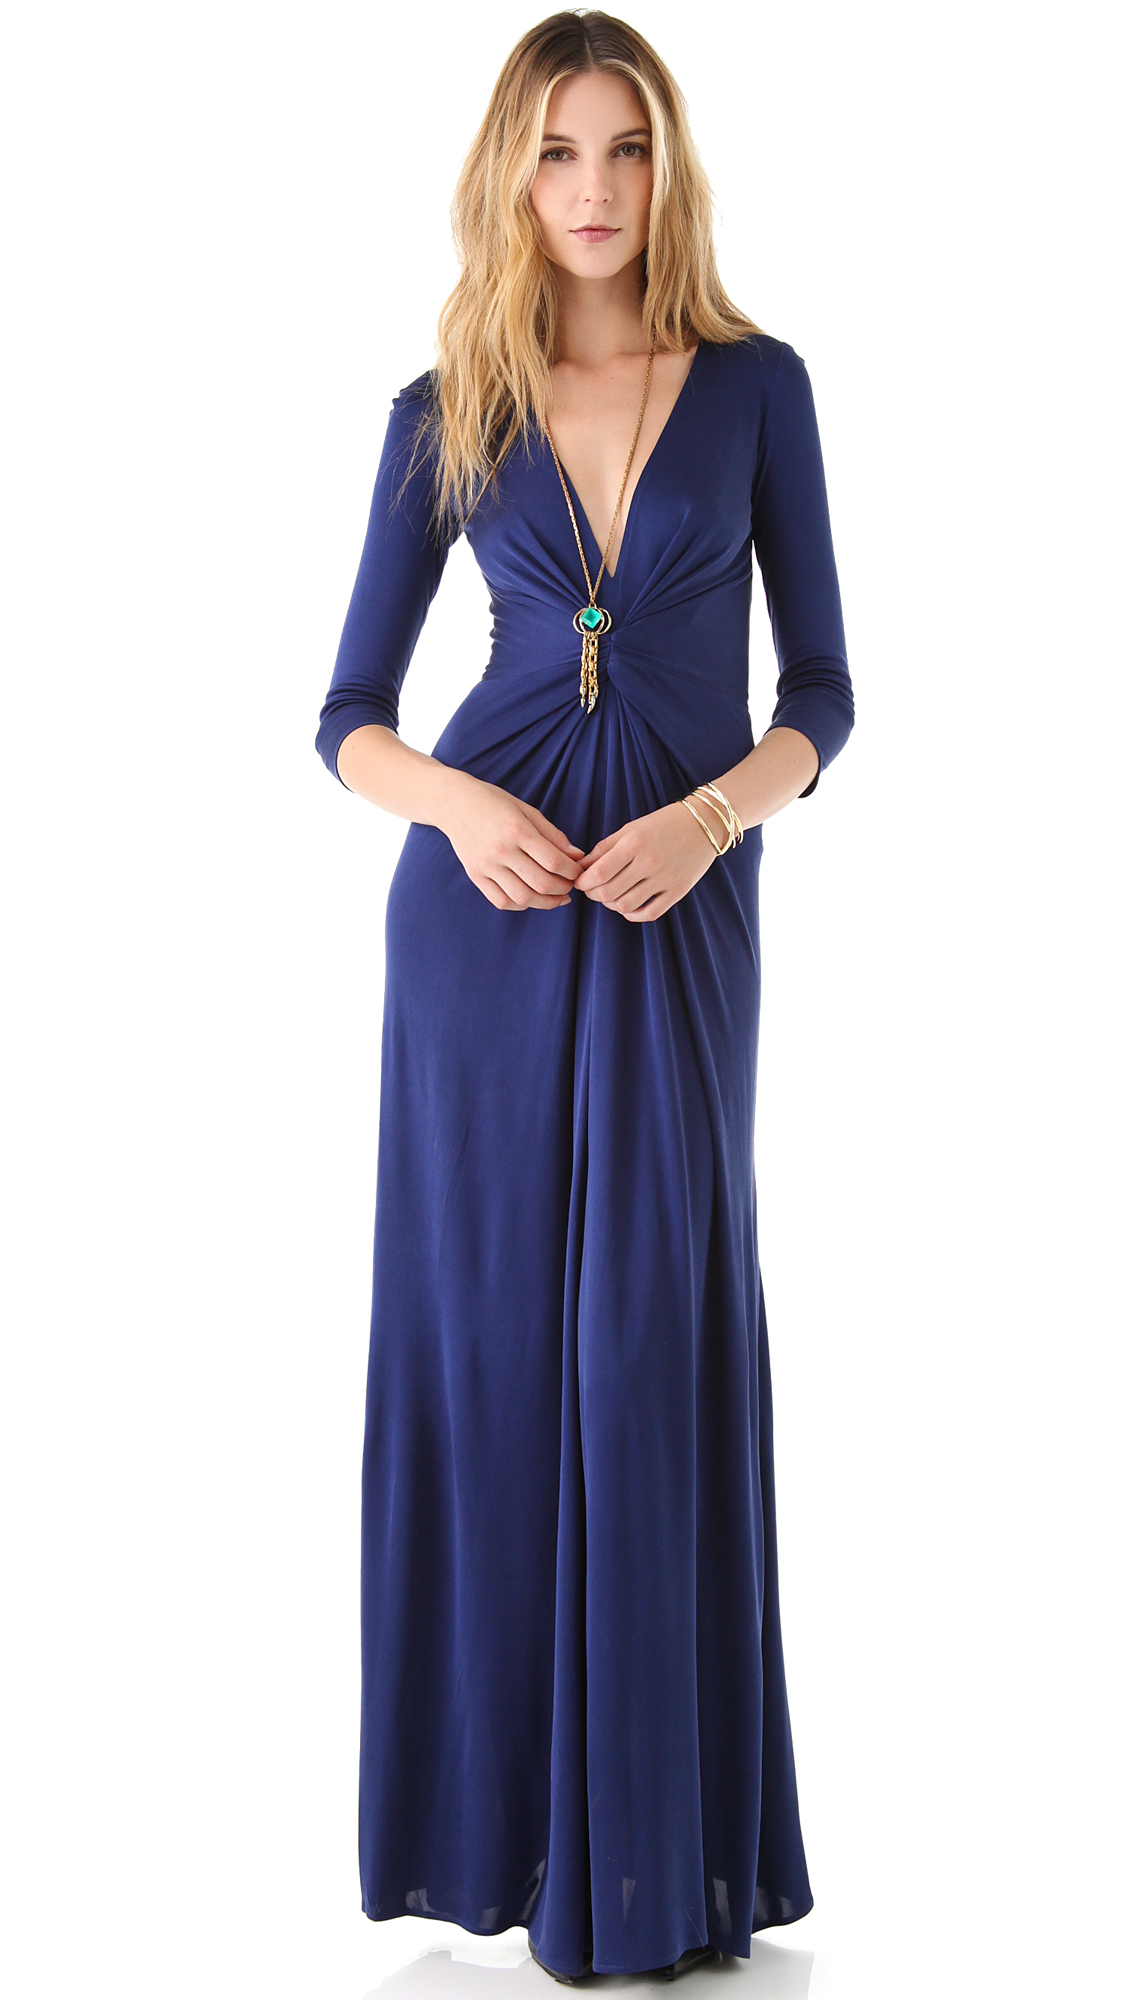 Lyst - Issa V Neck Long Sleeve Gown in Blue1128 x 2000